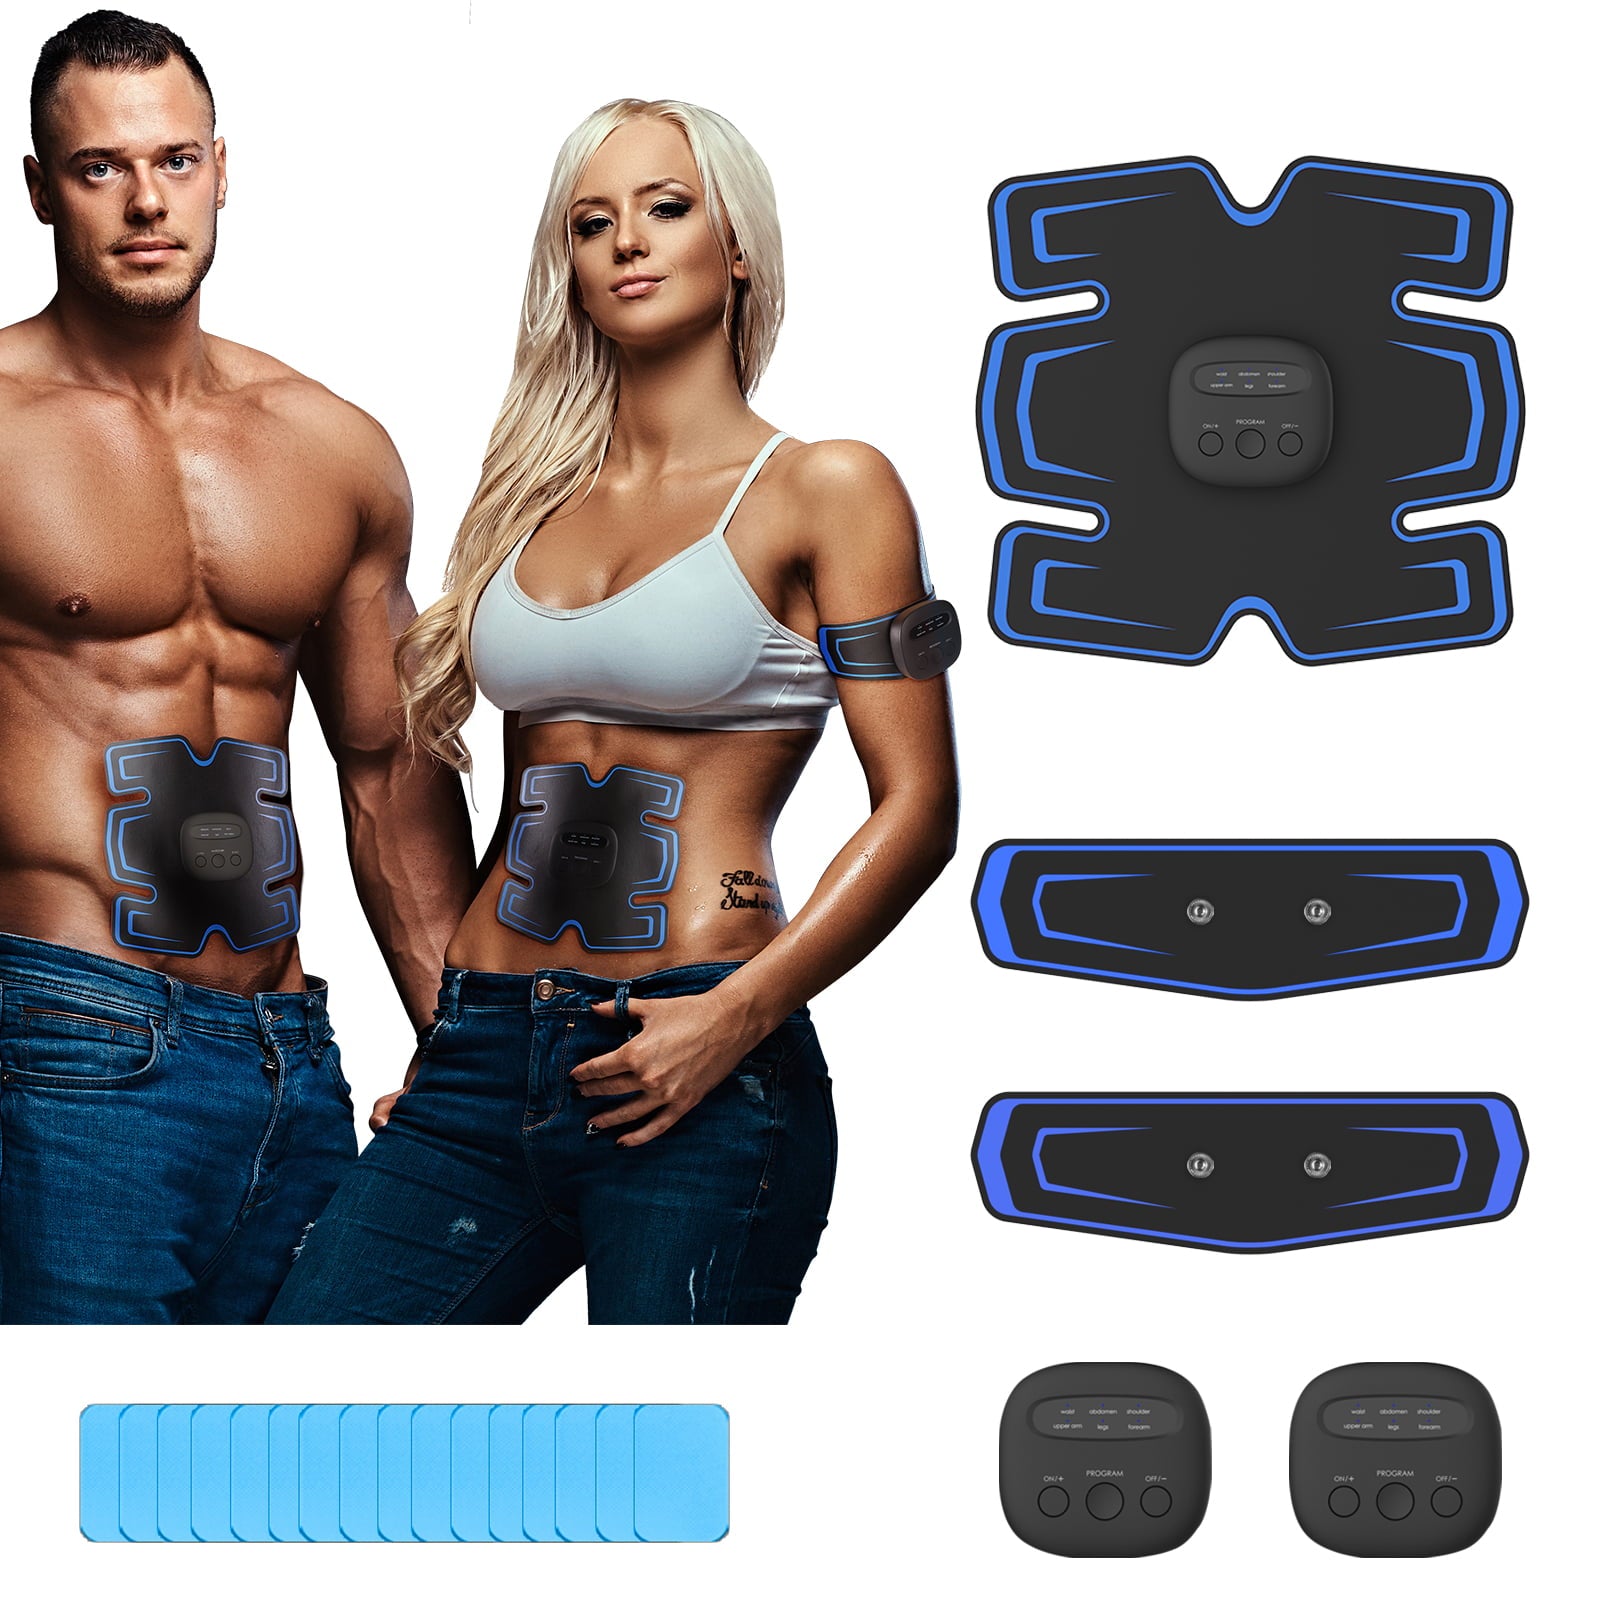 IFANZE Abs Stimulator, EMS Muscle Stimulation ABS Belt for Men and Women, Arm and Leg Trainer, Home Gym Fitness Equipment